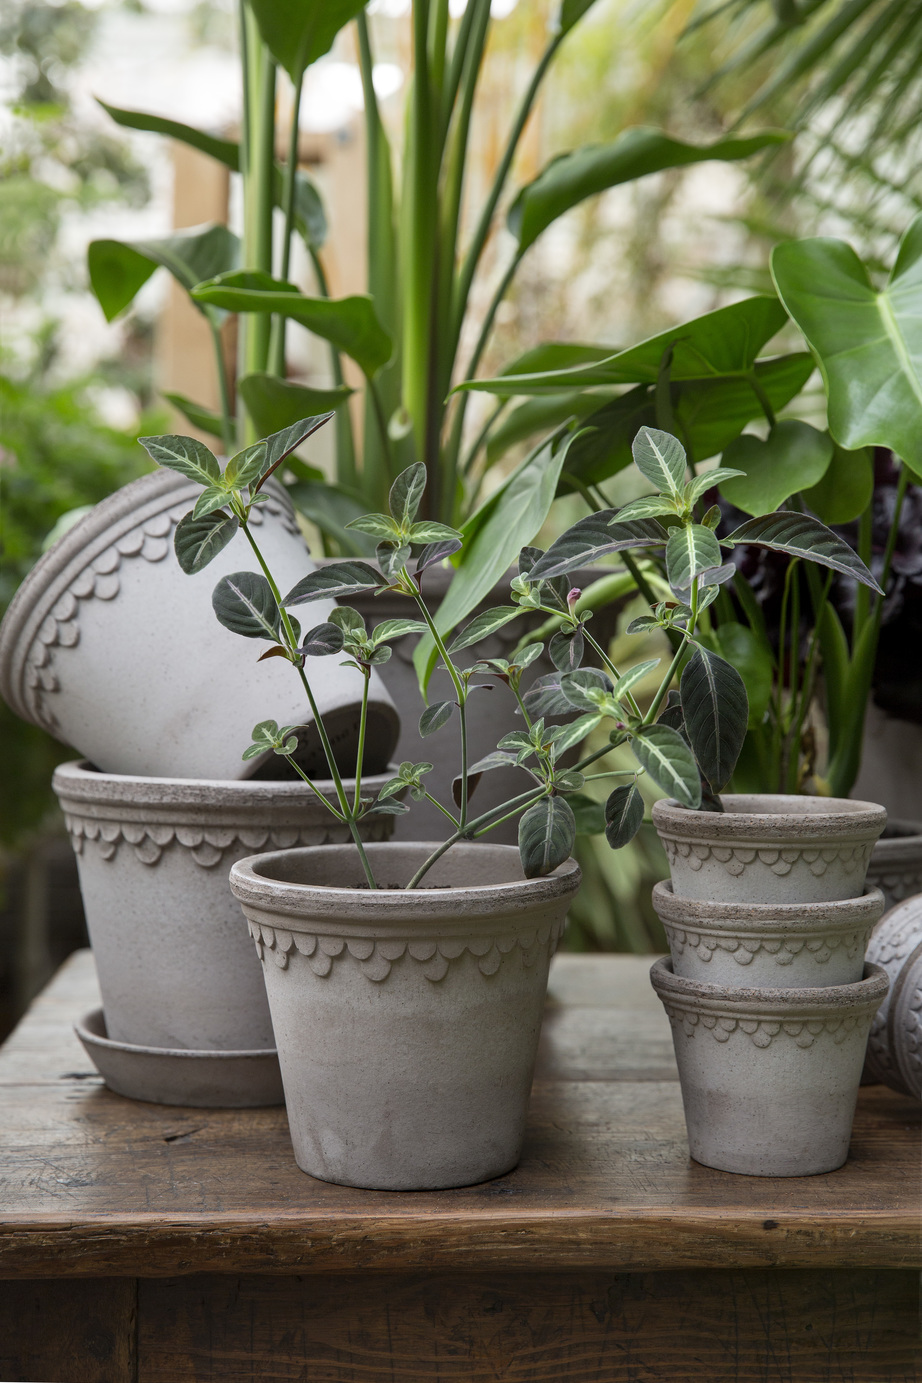 The grey Københavner pot from quality clay